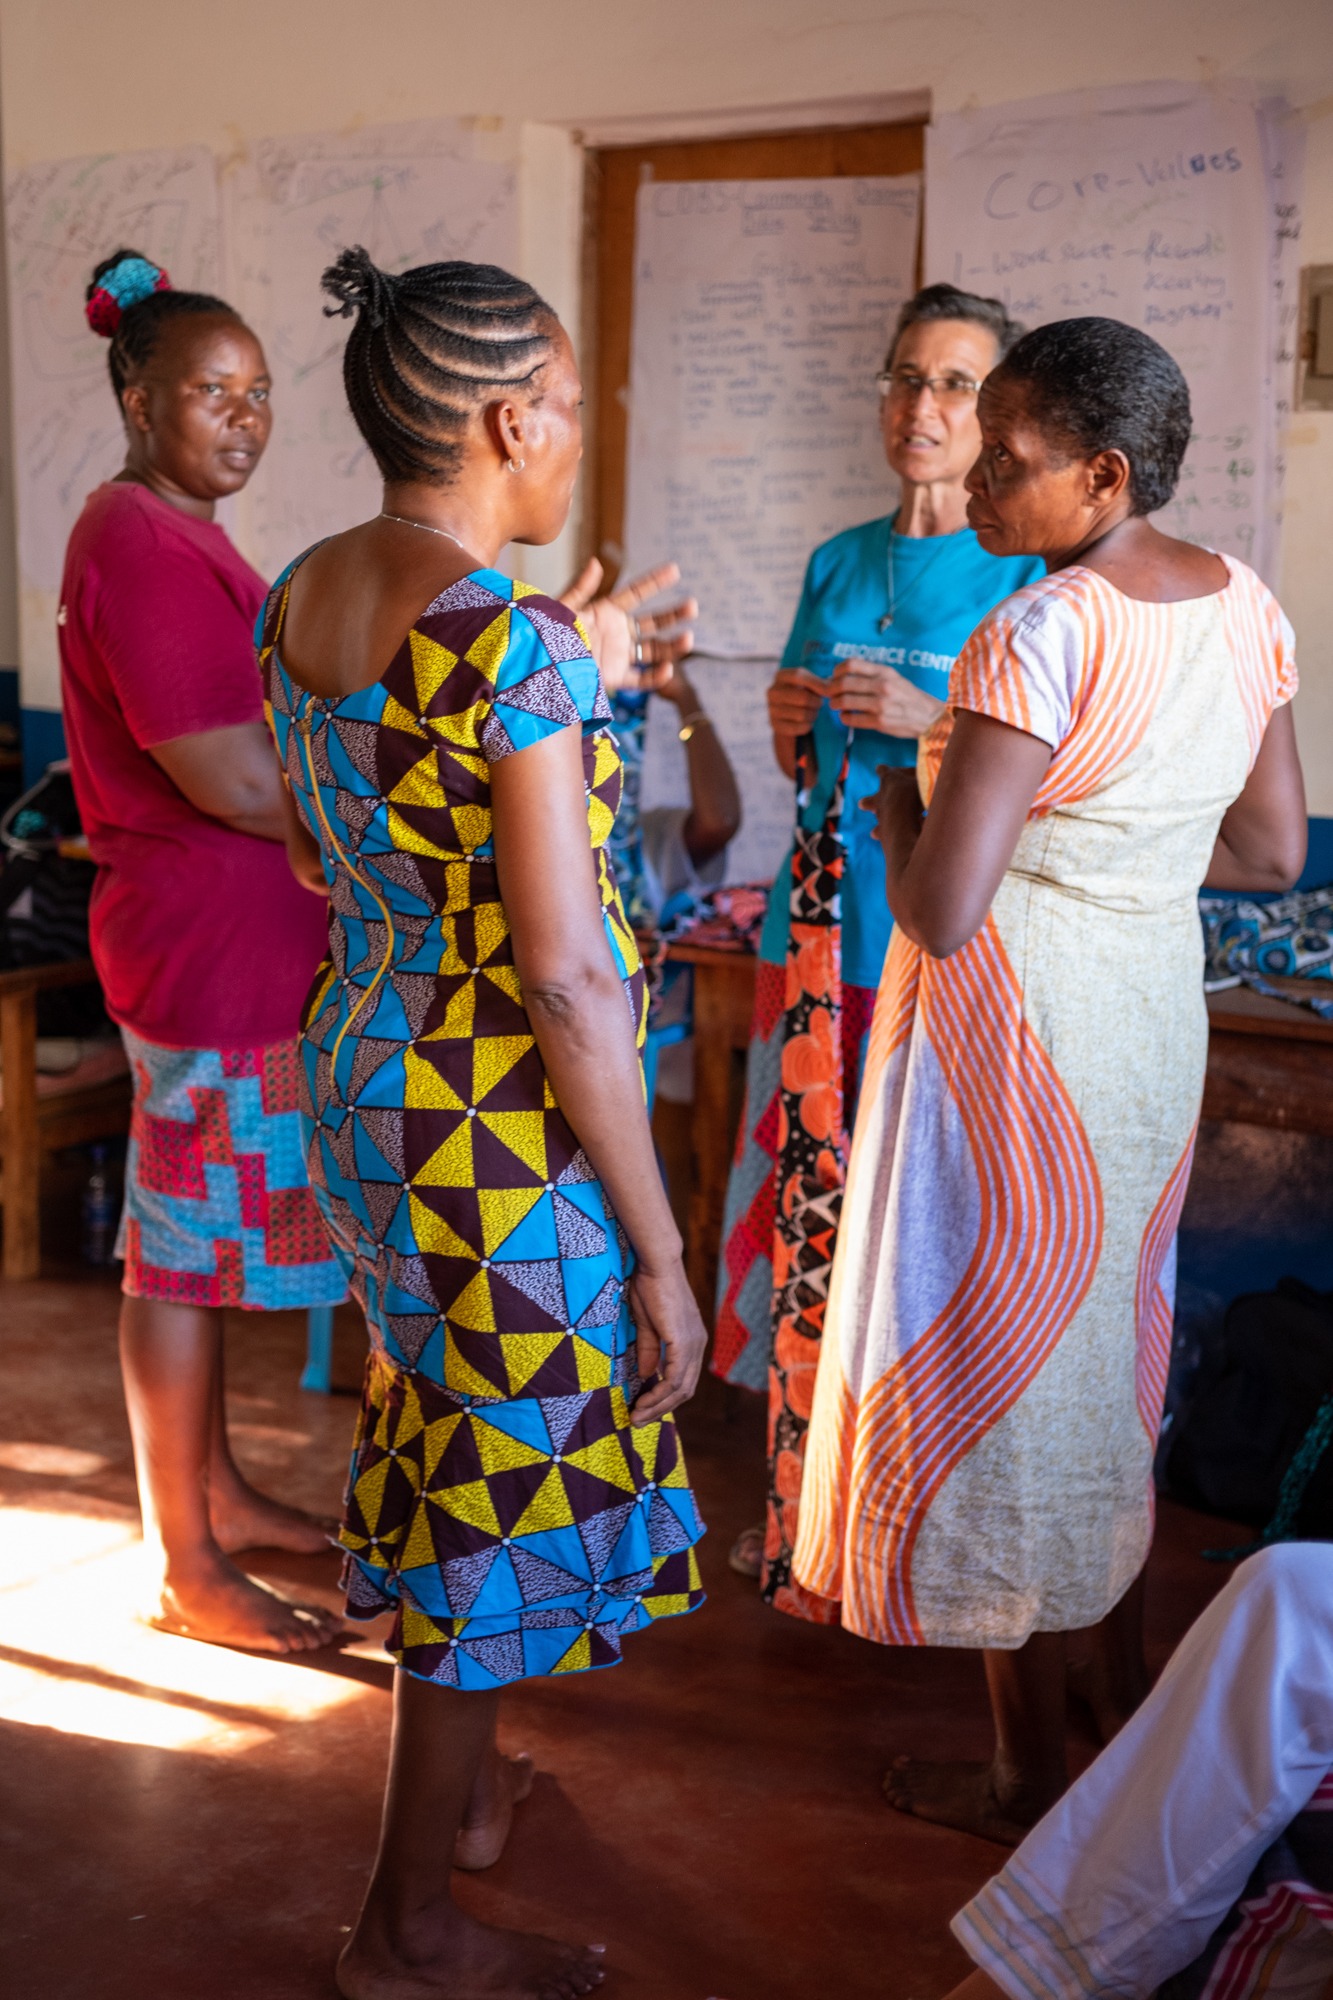 Wambui, Madame Grace, Madame Nina, and Madame Lynne discussing logistics in the classroom